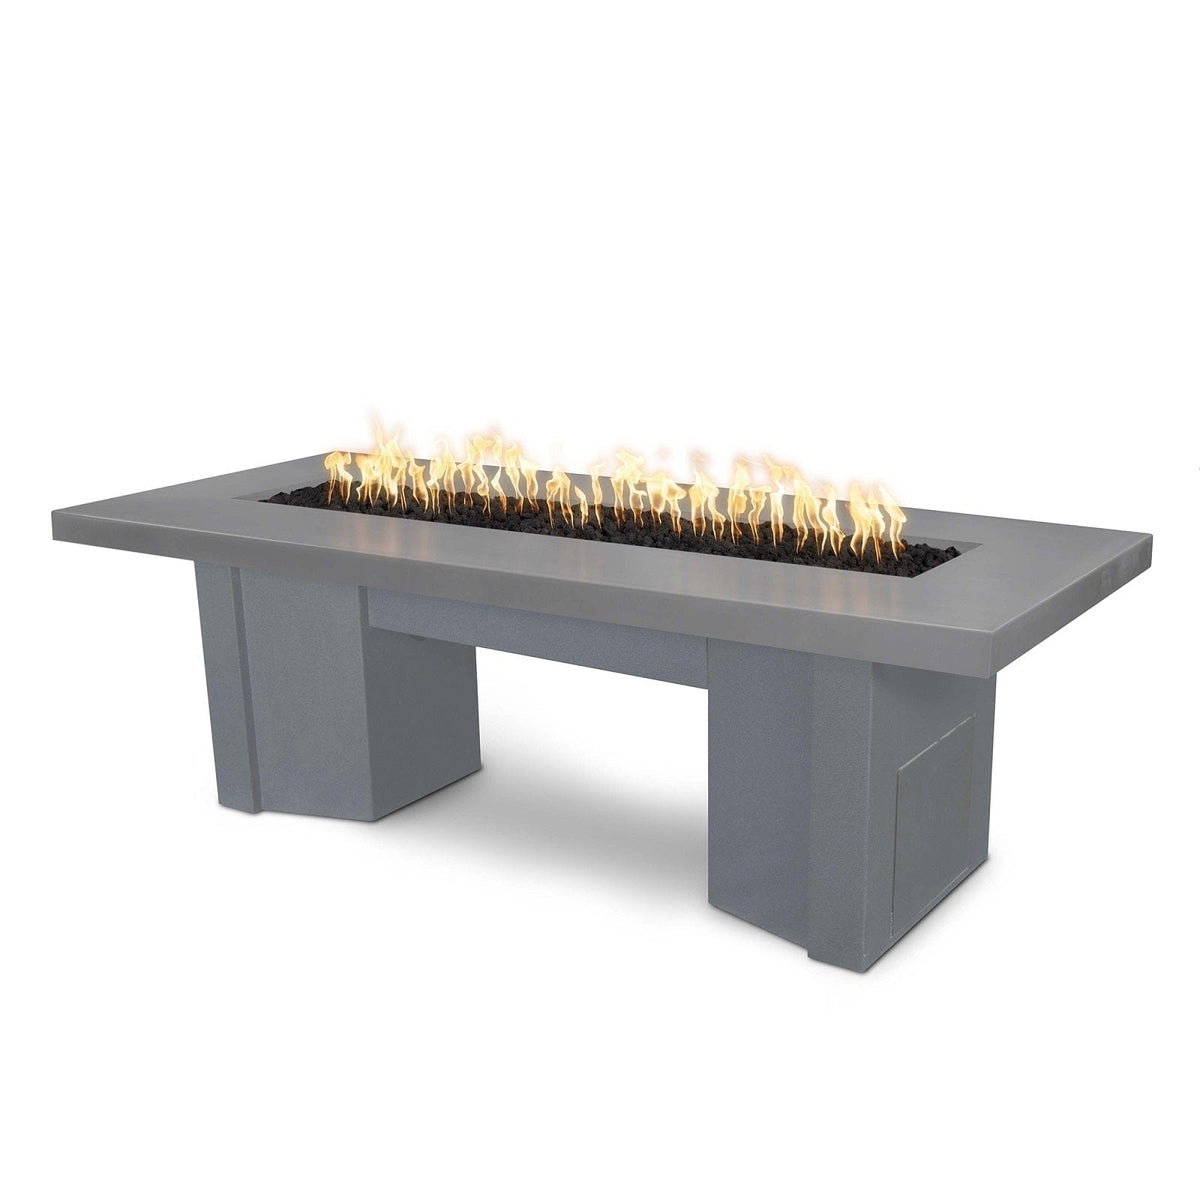 The Outdoor Plus Fire Features Natural Gray (-NGY) / Gray Powder Coated Steel (-GRY) The Outdoor Plus 60&quot; Alameda Fire Table Smooth Concrete in Liquid Propane - 110V Plug &amp; Play Electronic Ignition / OPT-ALMGFRC60EKIT-LP